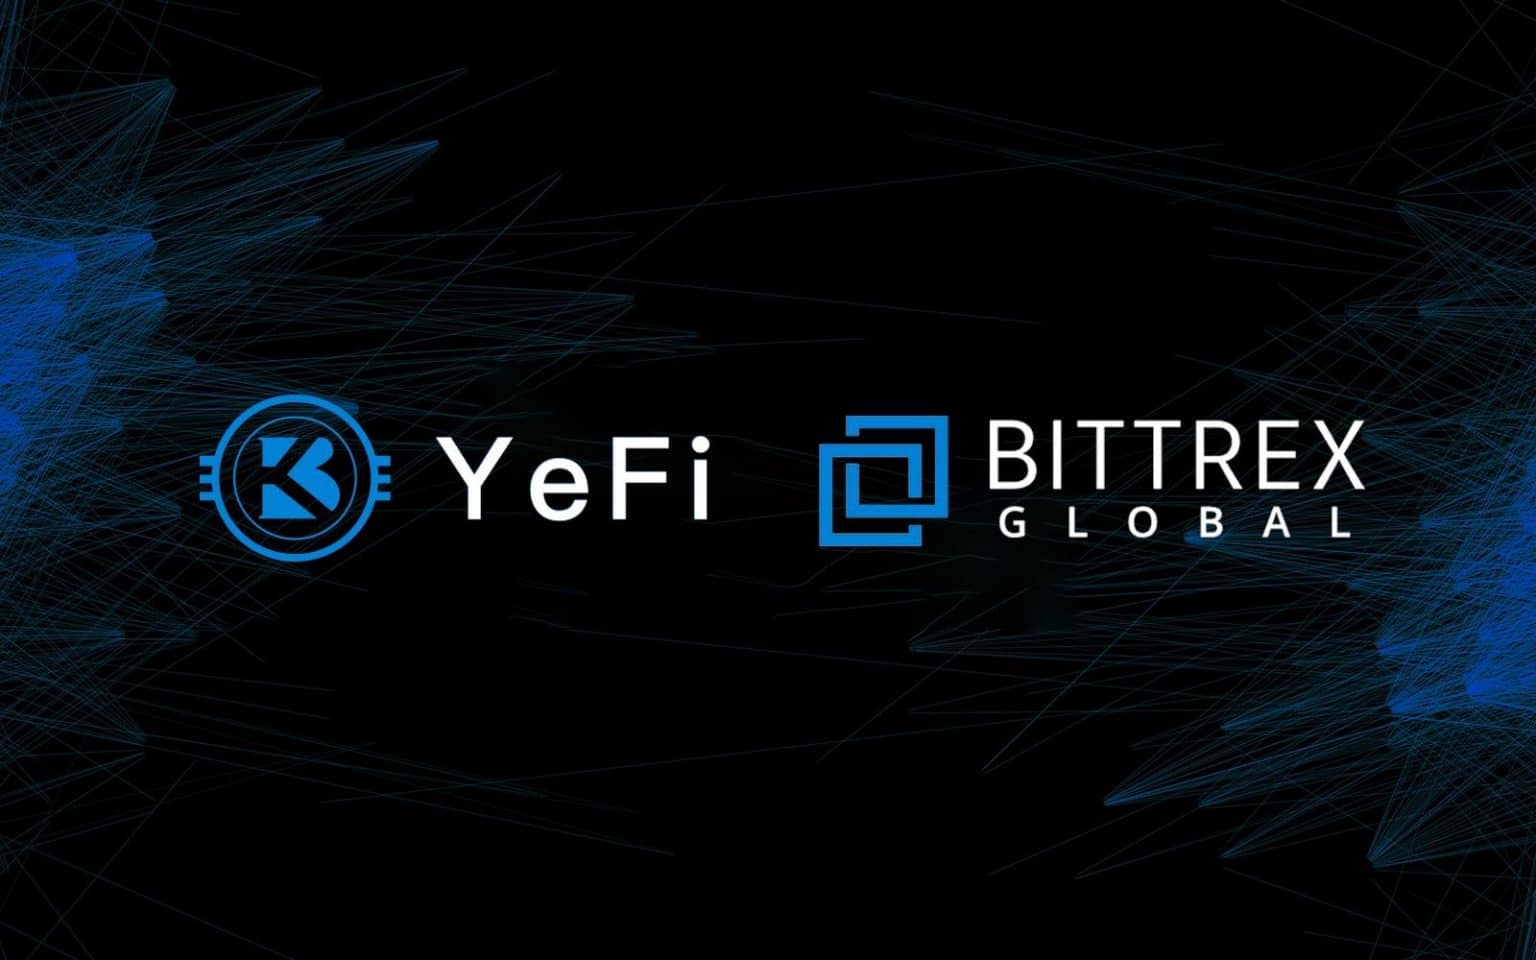 YEFI To Be Listed on Bittrex Starting July 22 - The Crypto ...